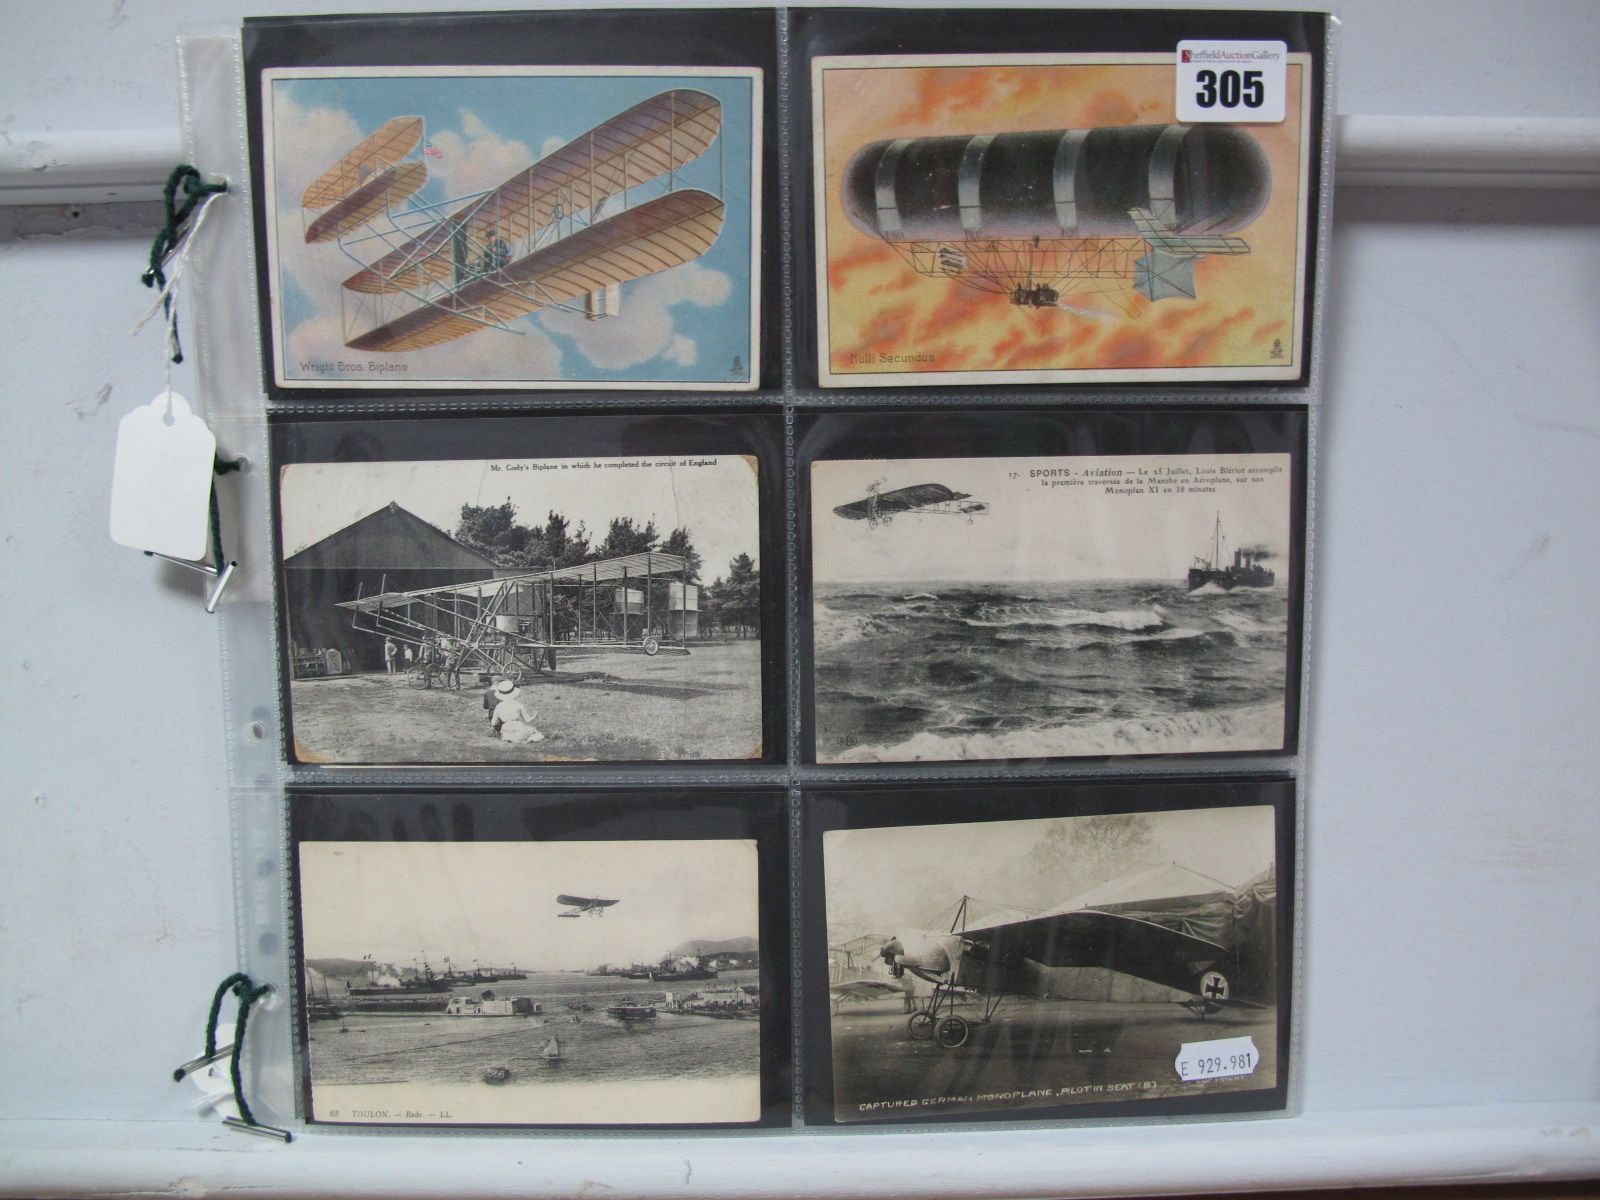 Fifty Seven Picture Postcards and Real Photo's Depicting Pioneers of Early Flight and Their